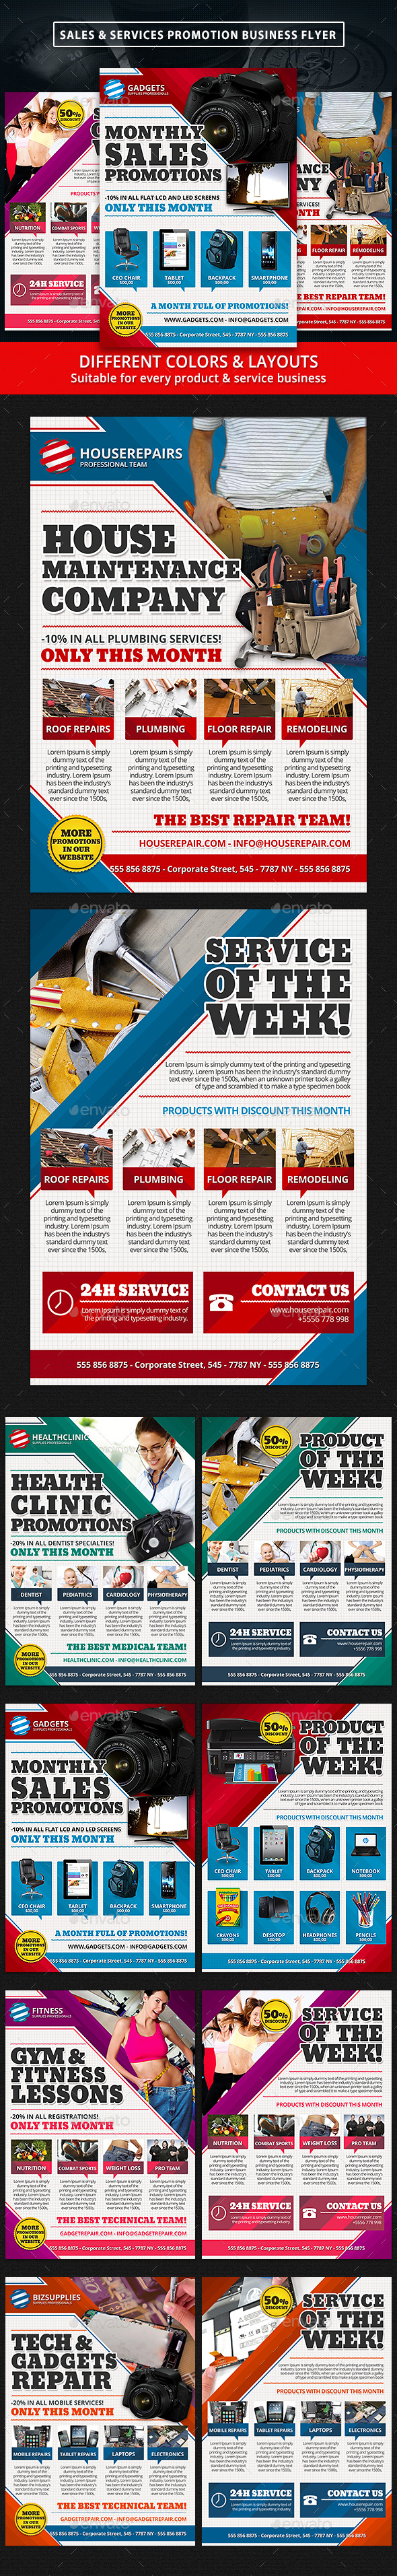 Product Sales & Services Promotion Business Flyer